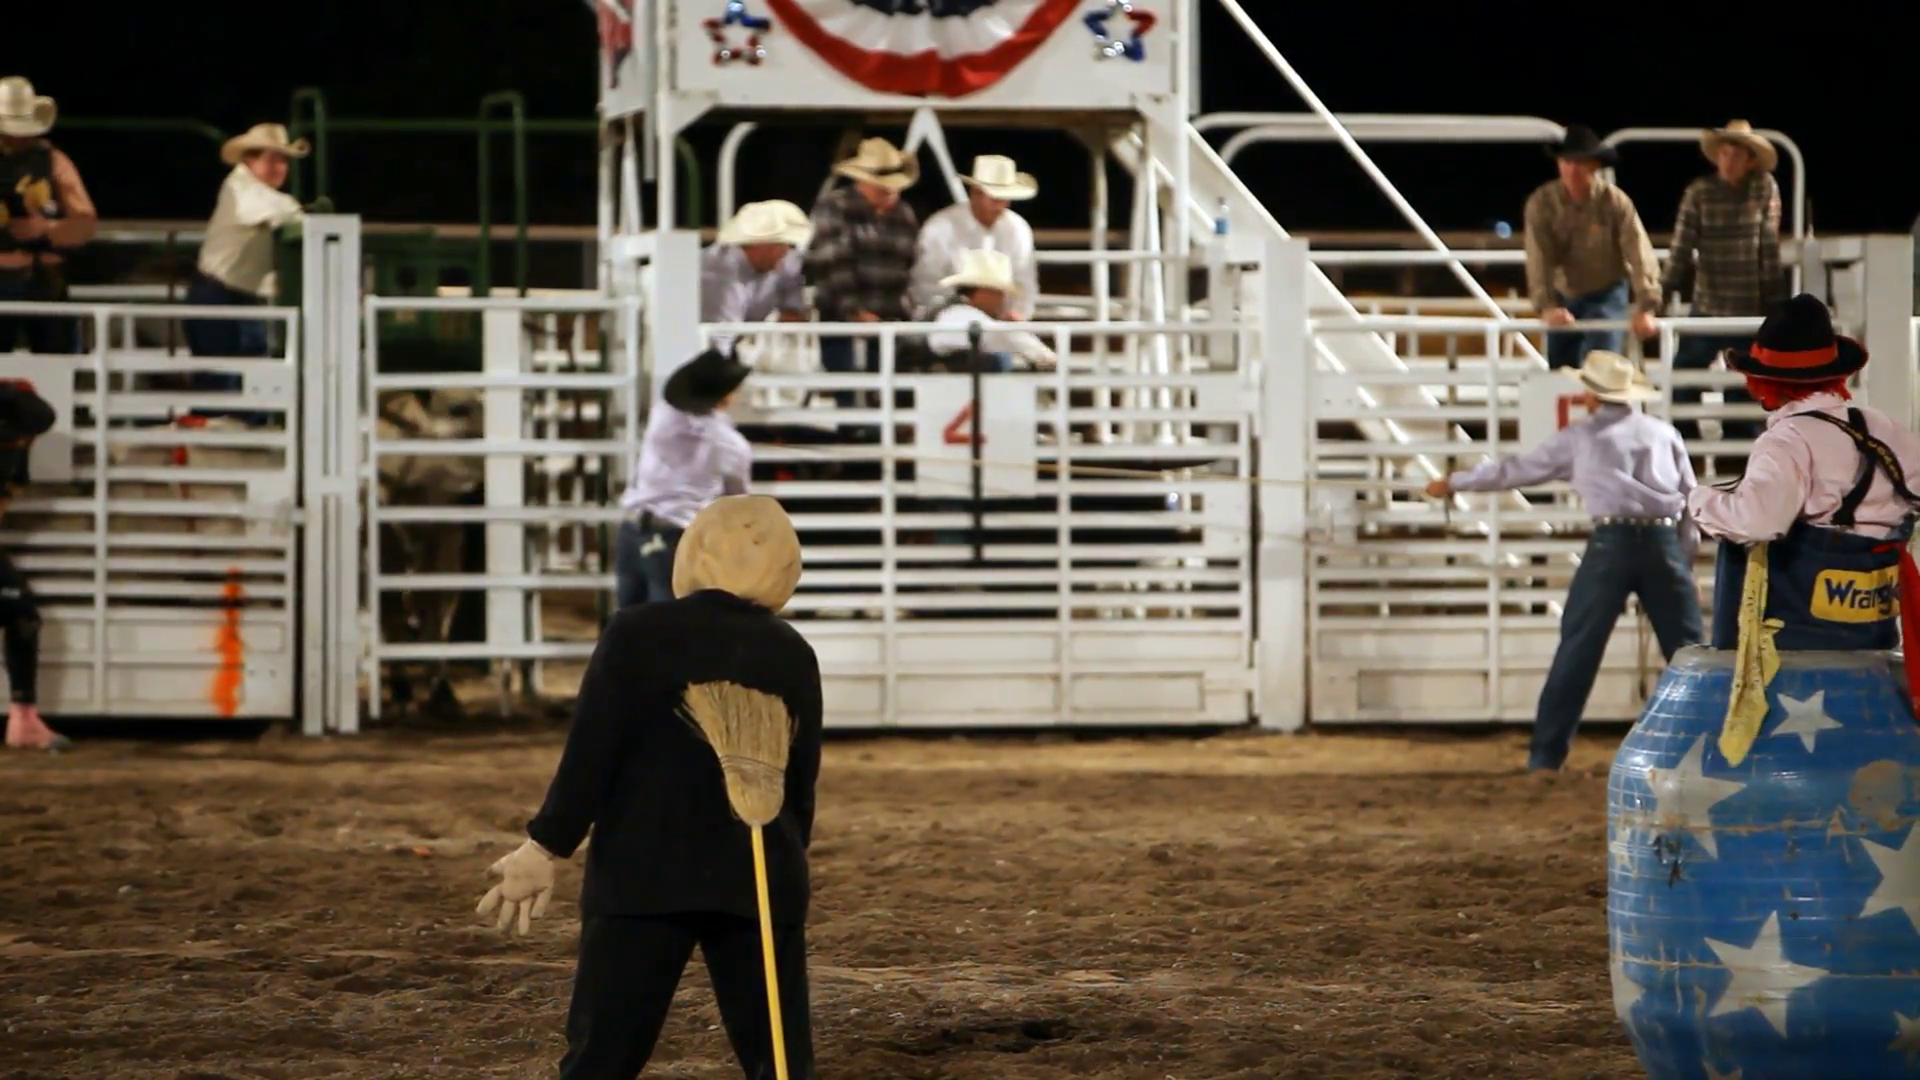 Rodeo calf roping with a youn